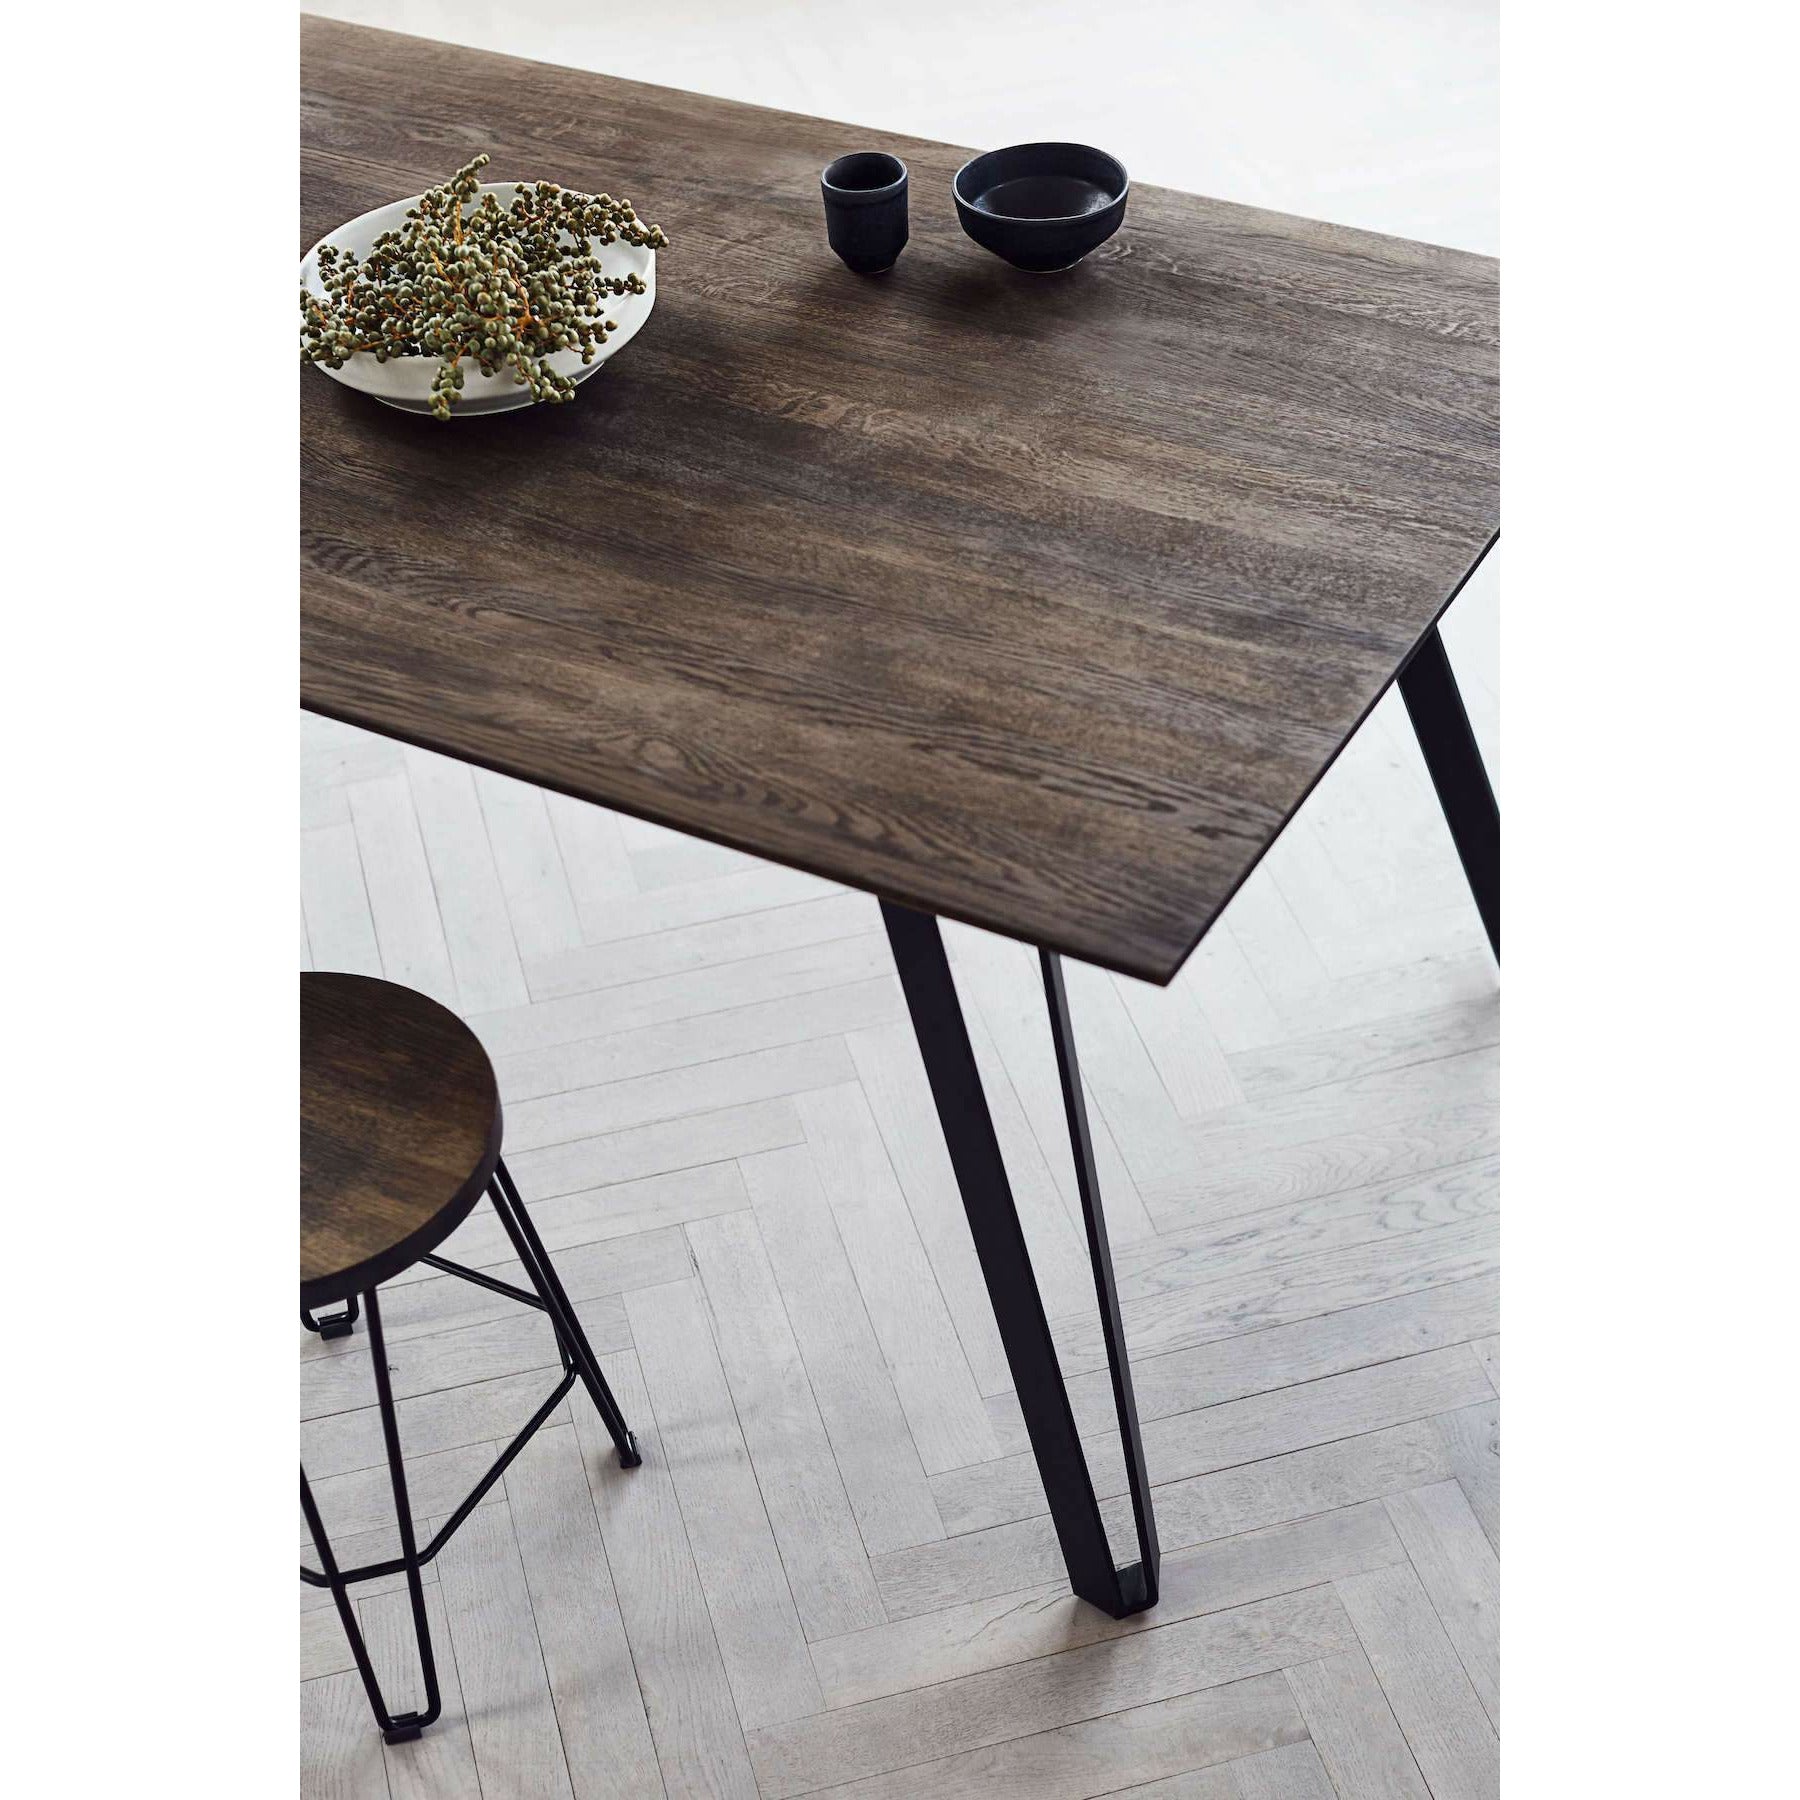 Muubs Space Dining Table Smoked Oak, 220 cm